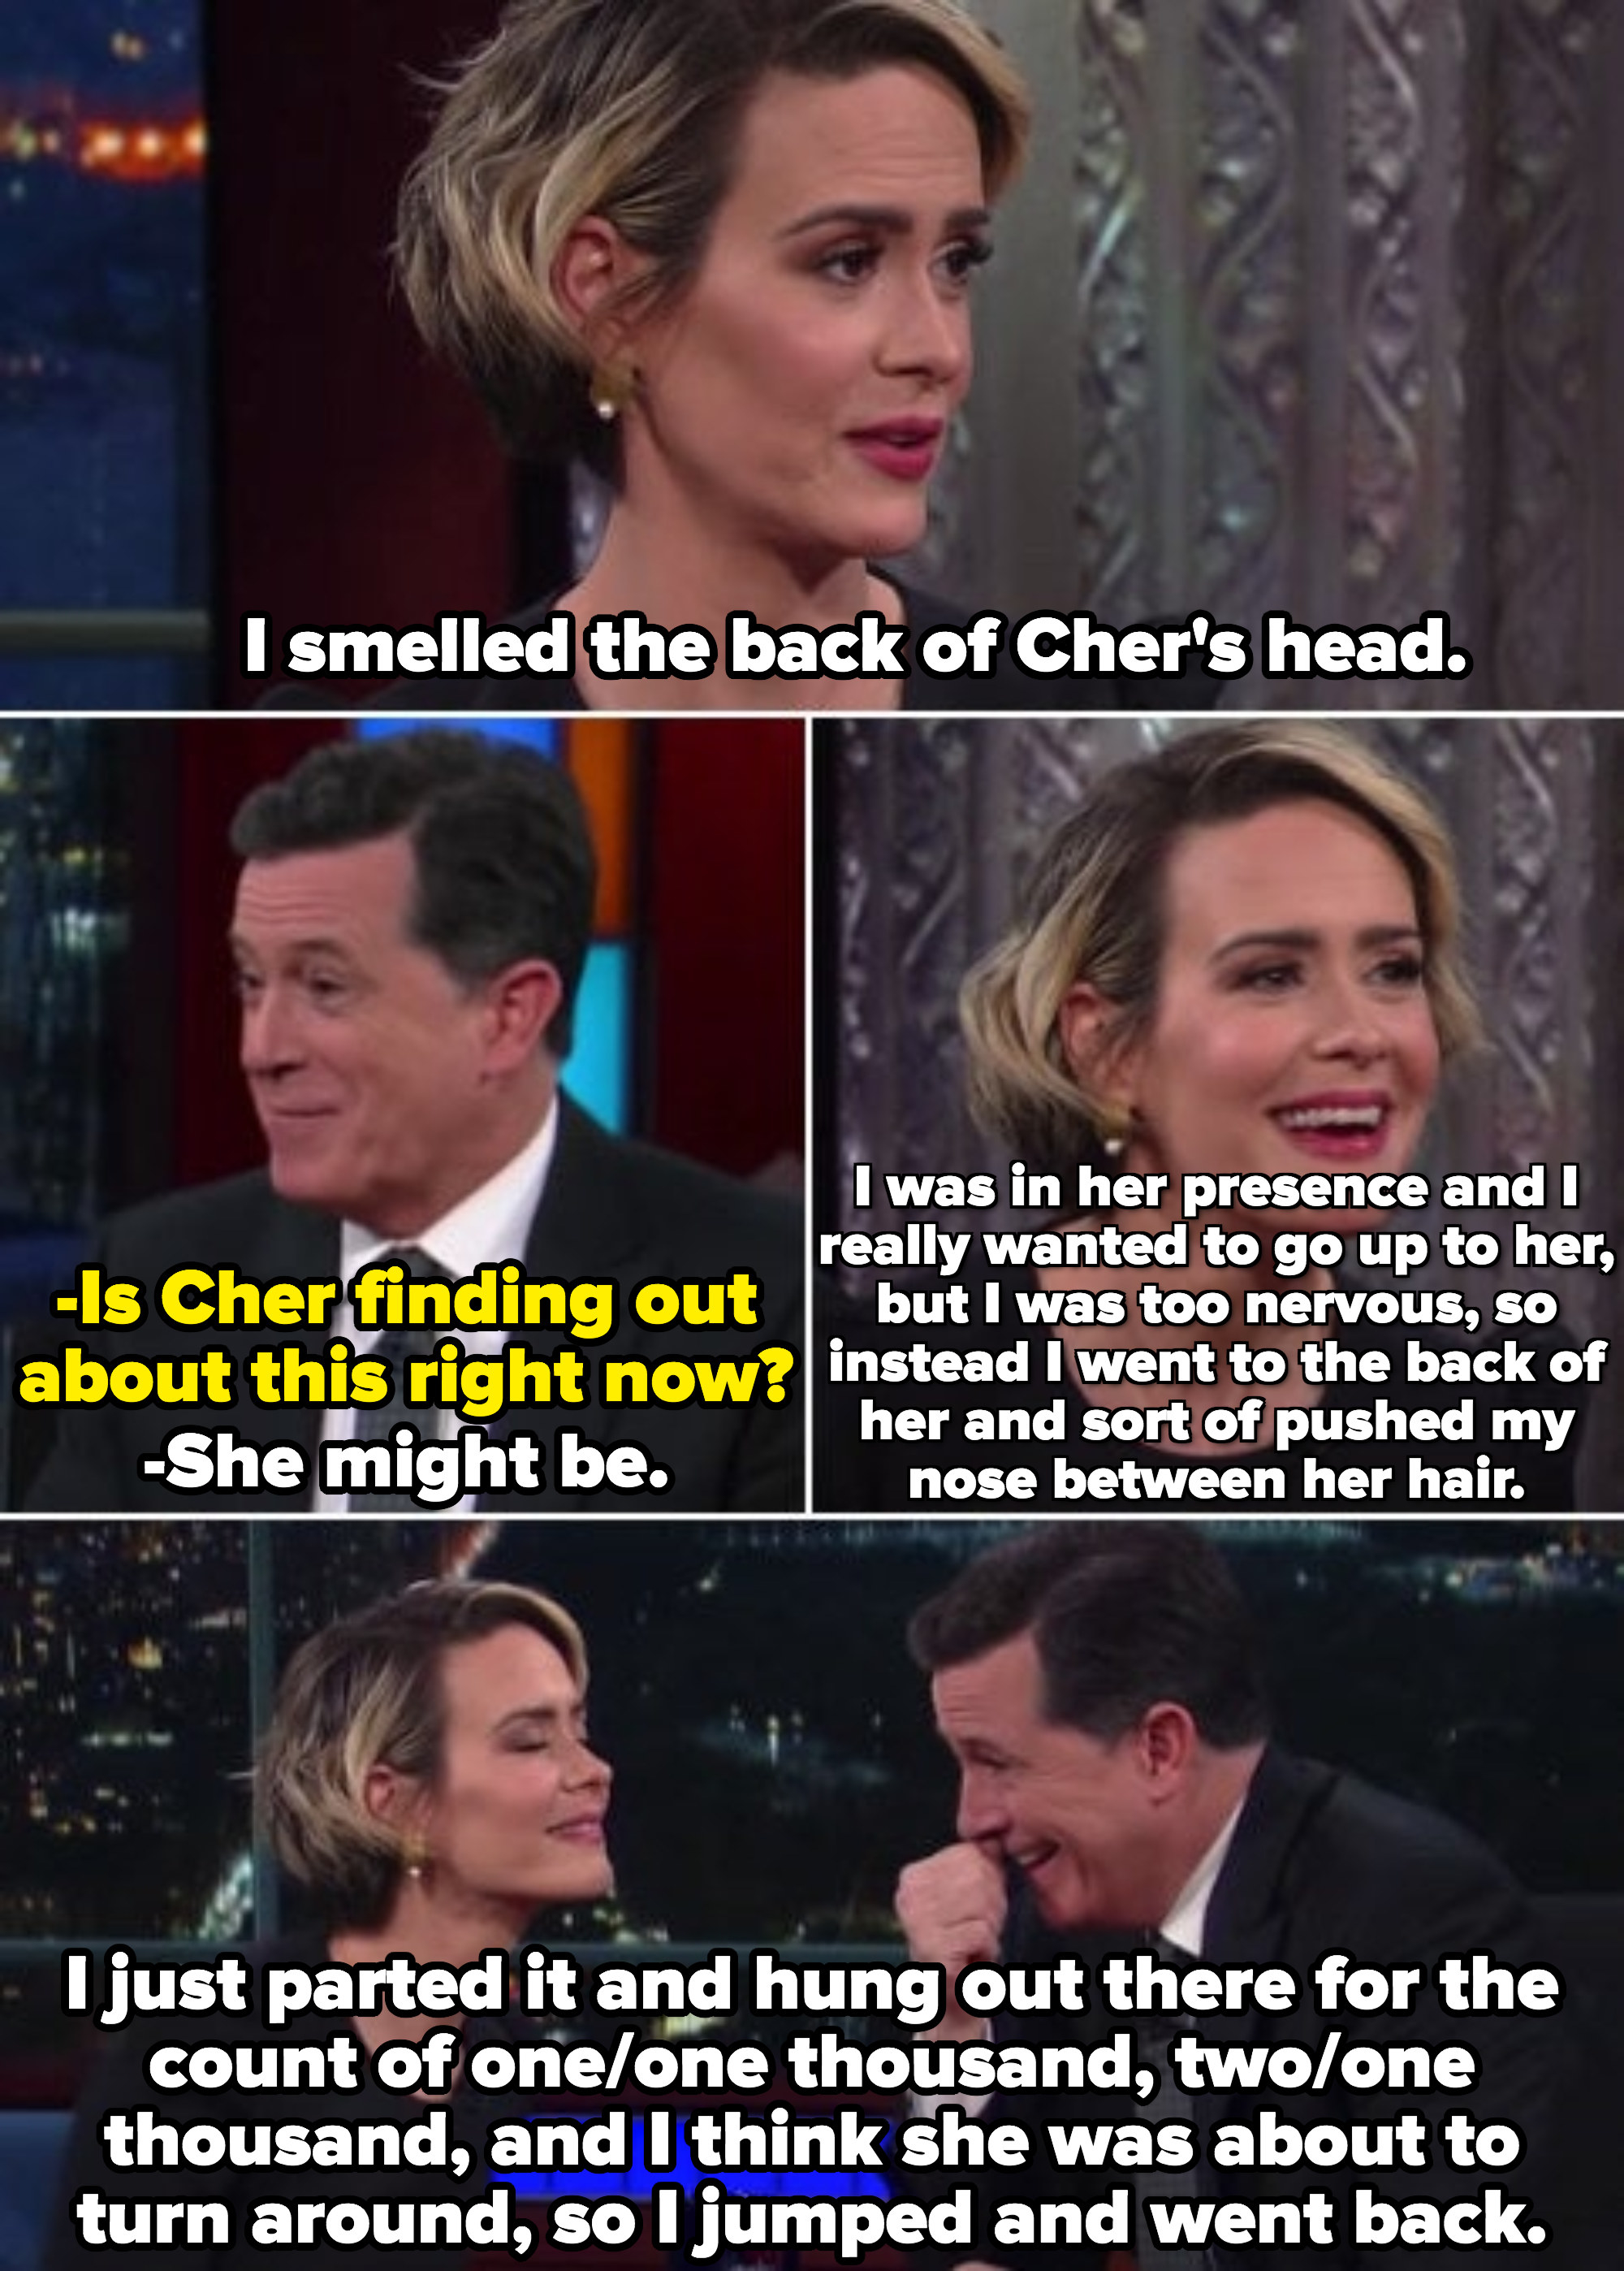 Sarah Paulson describing how she smelled the back of Cher&#x27;s head at an entertainment event and stayed there for a long time, while Stephen Colbert laughs in amazement